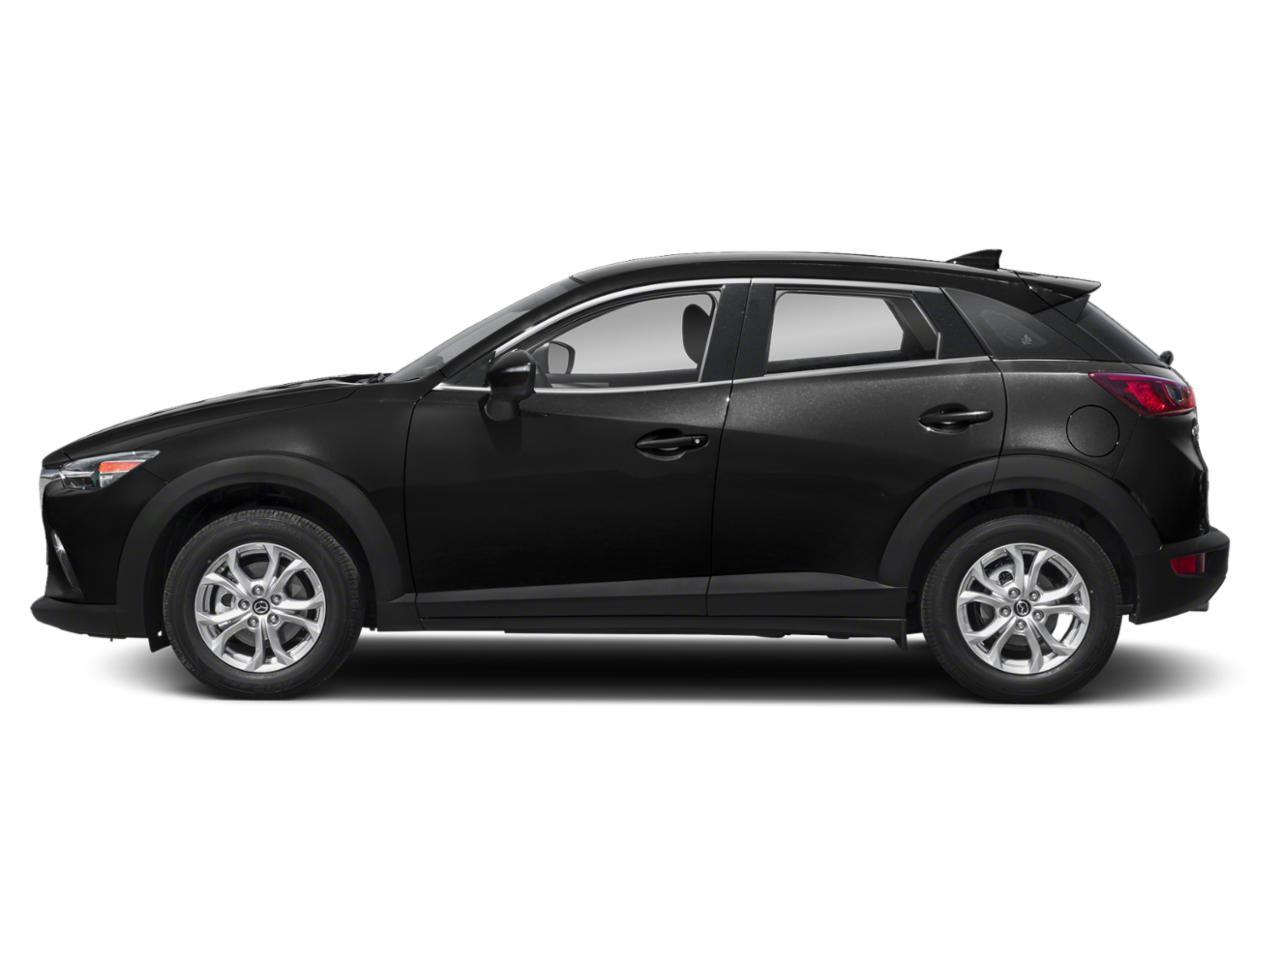 2019 Mazda CX-3 GS AWD| Sunroof, Htd Seats/Steering, No Accidents!